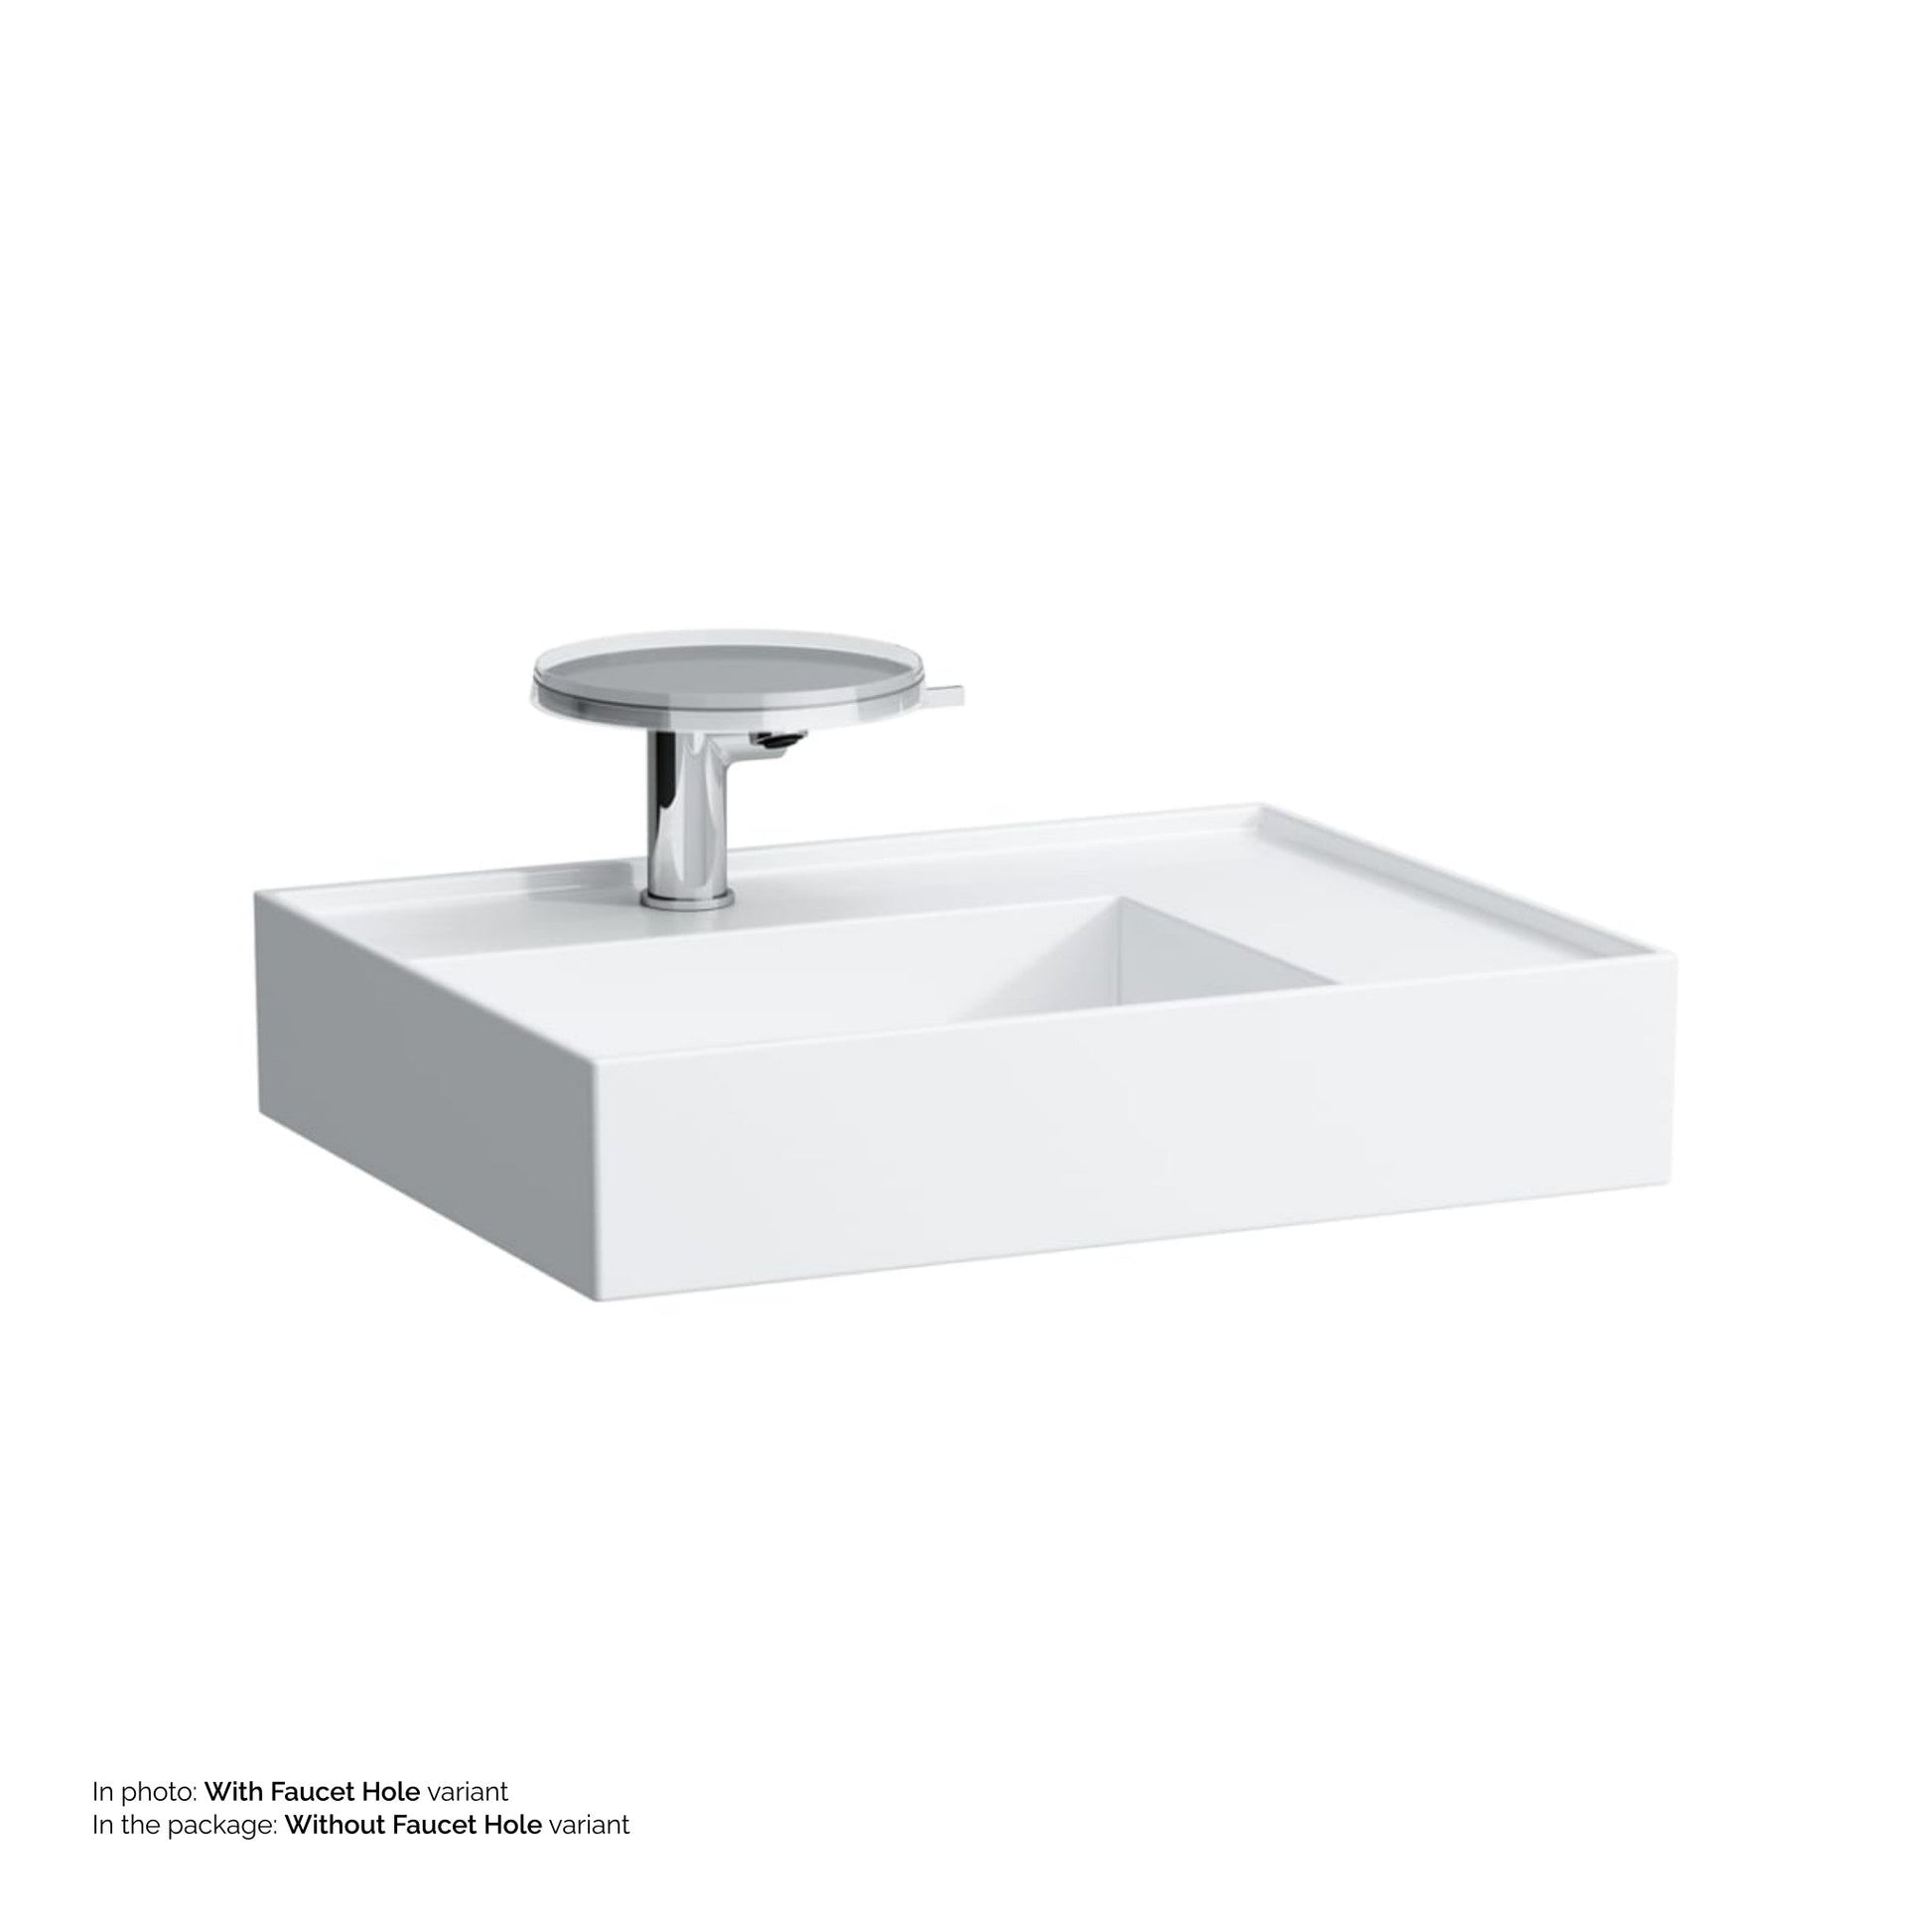 Laufen Kartell 24" x 18" White Countertop Shelf-Right Bathroom Sink Without Faucet Hole